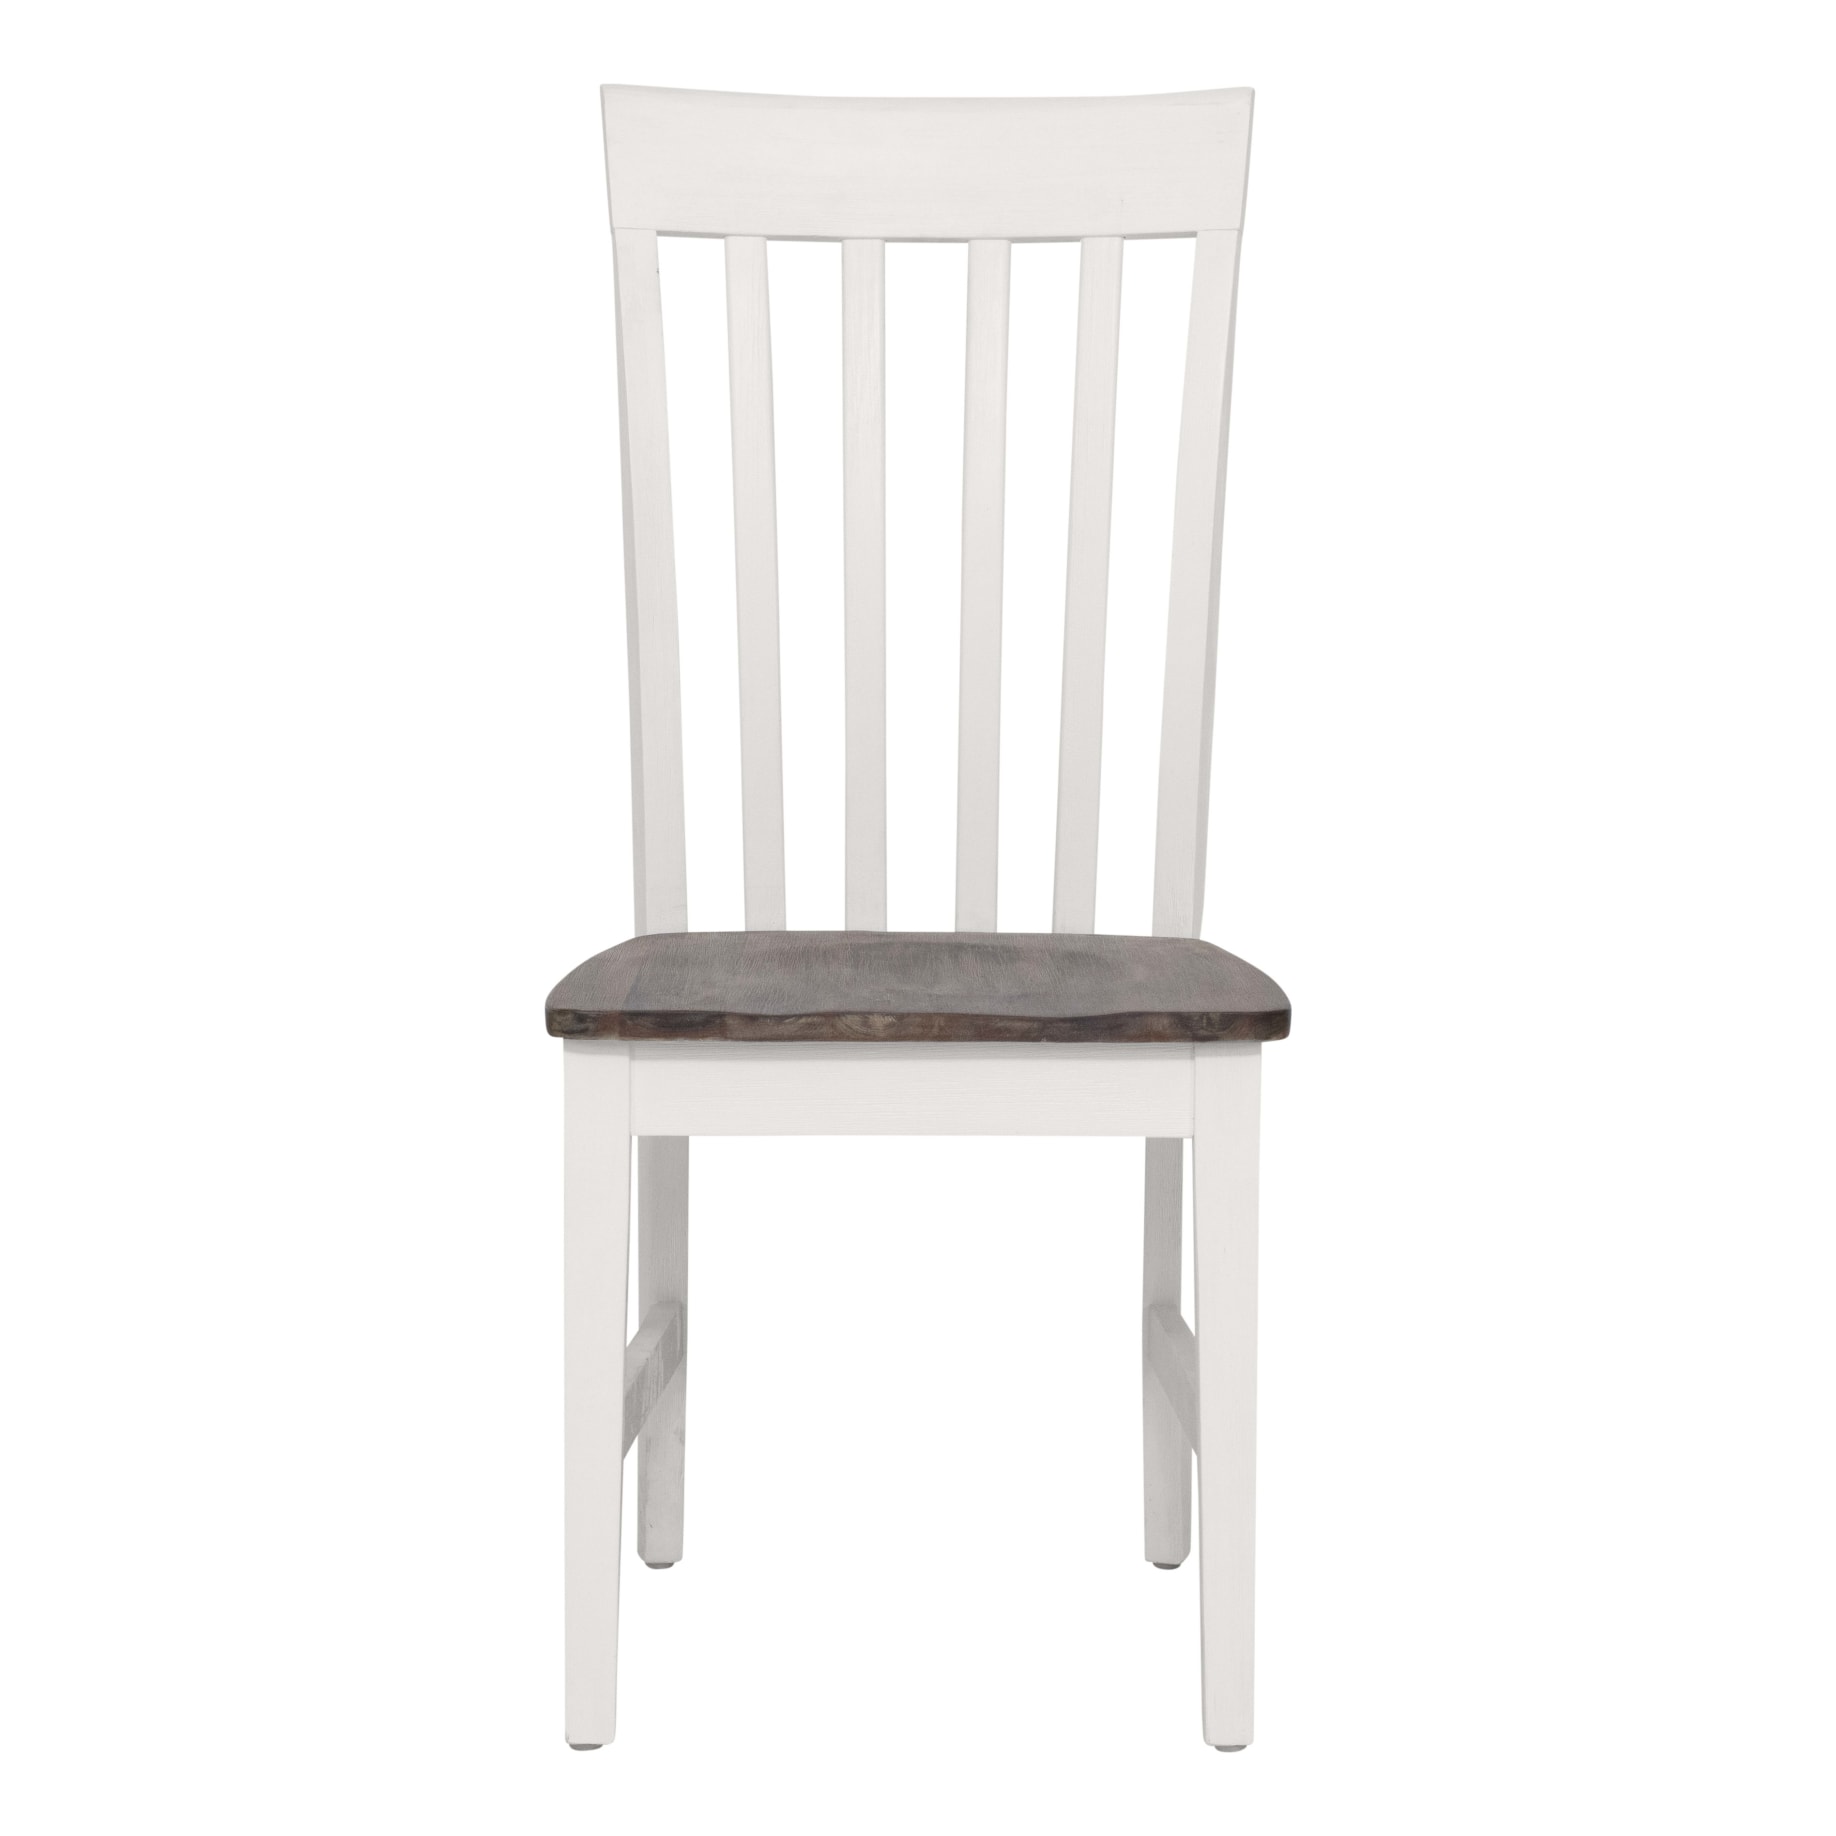 Hamptons Dining Chair in Two Tone